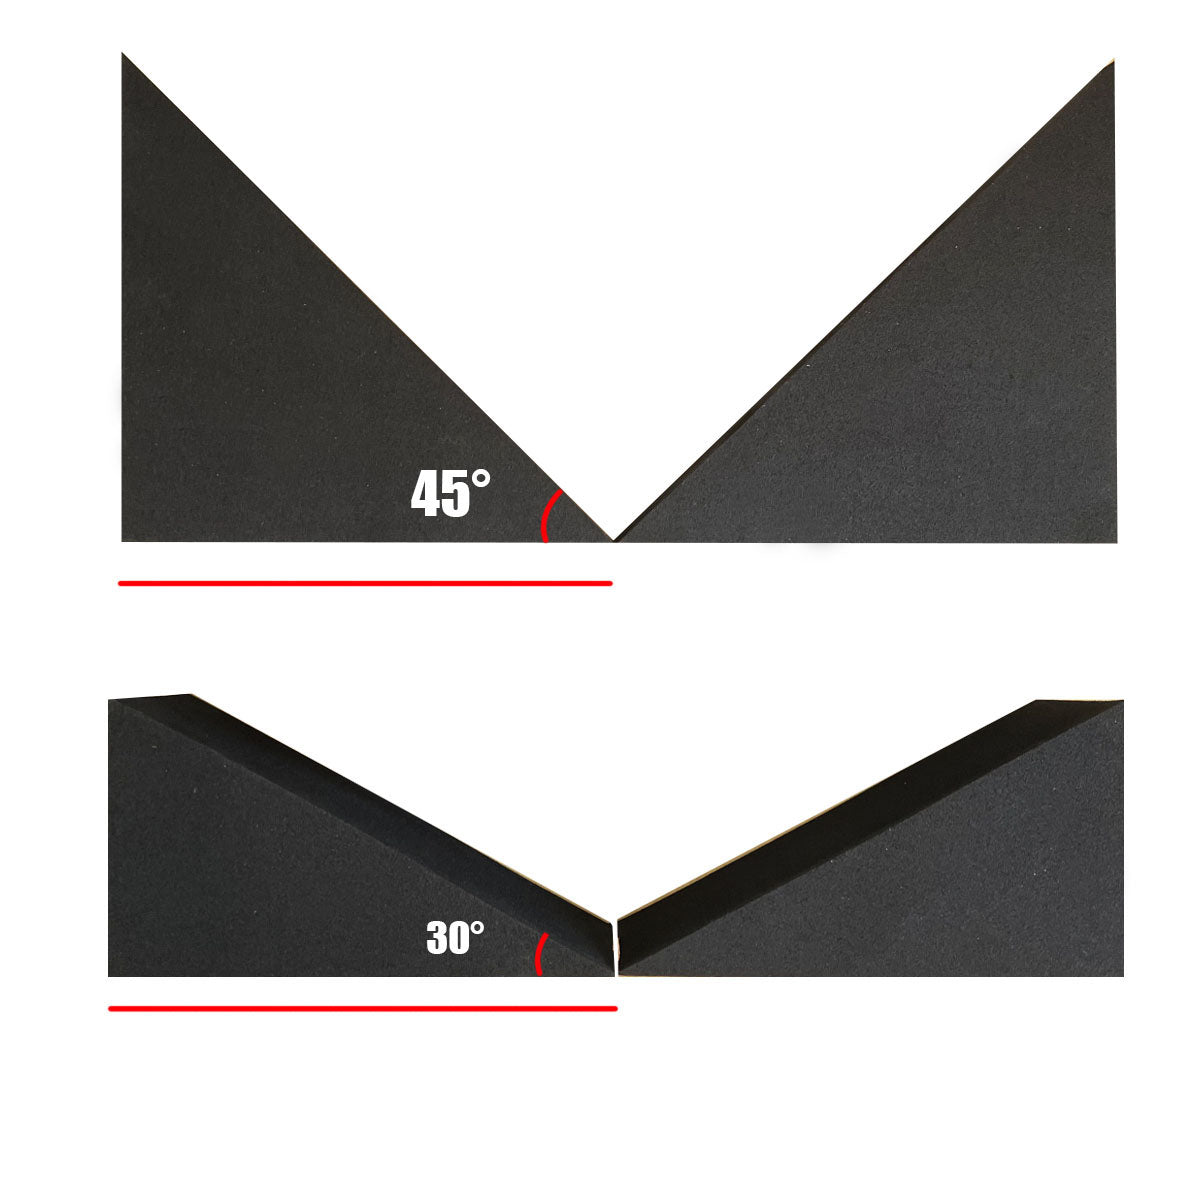 Stained Glass 3D Foam Angle Wedge Tool 45°/30° |Set of 2 Pairs (Angle Wedge A)